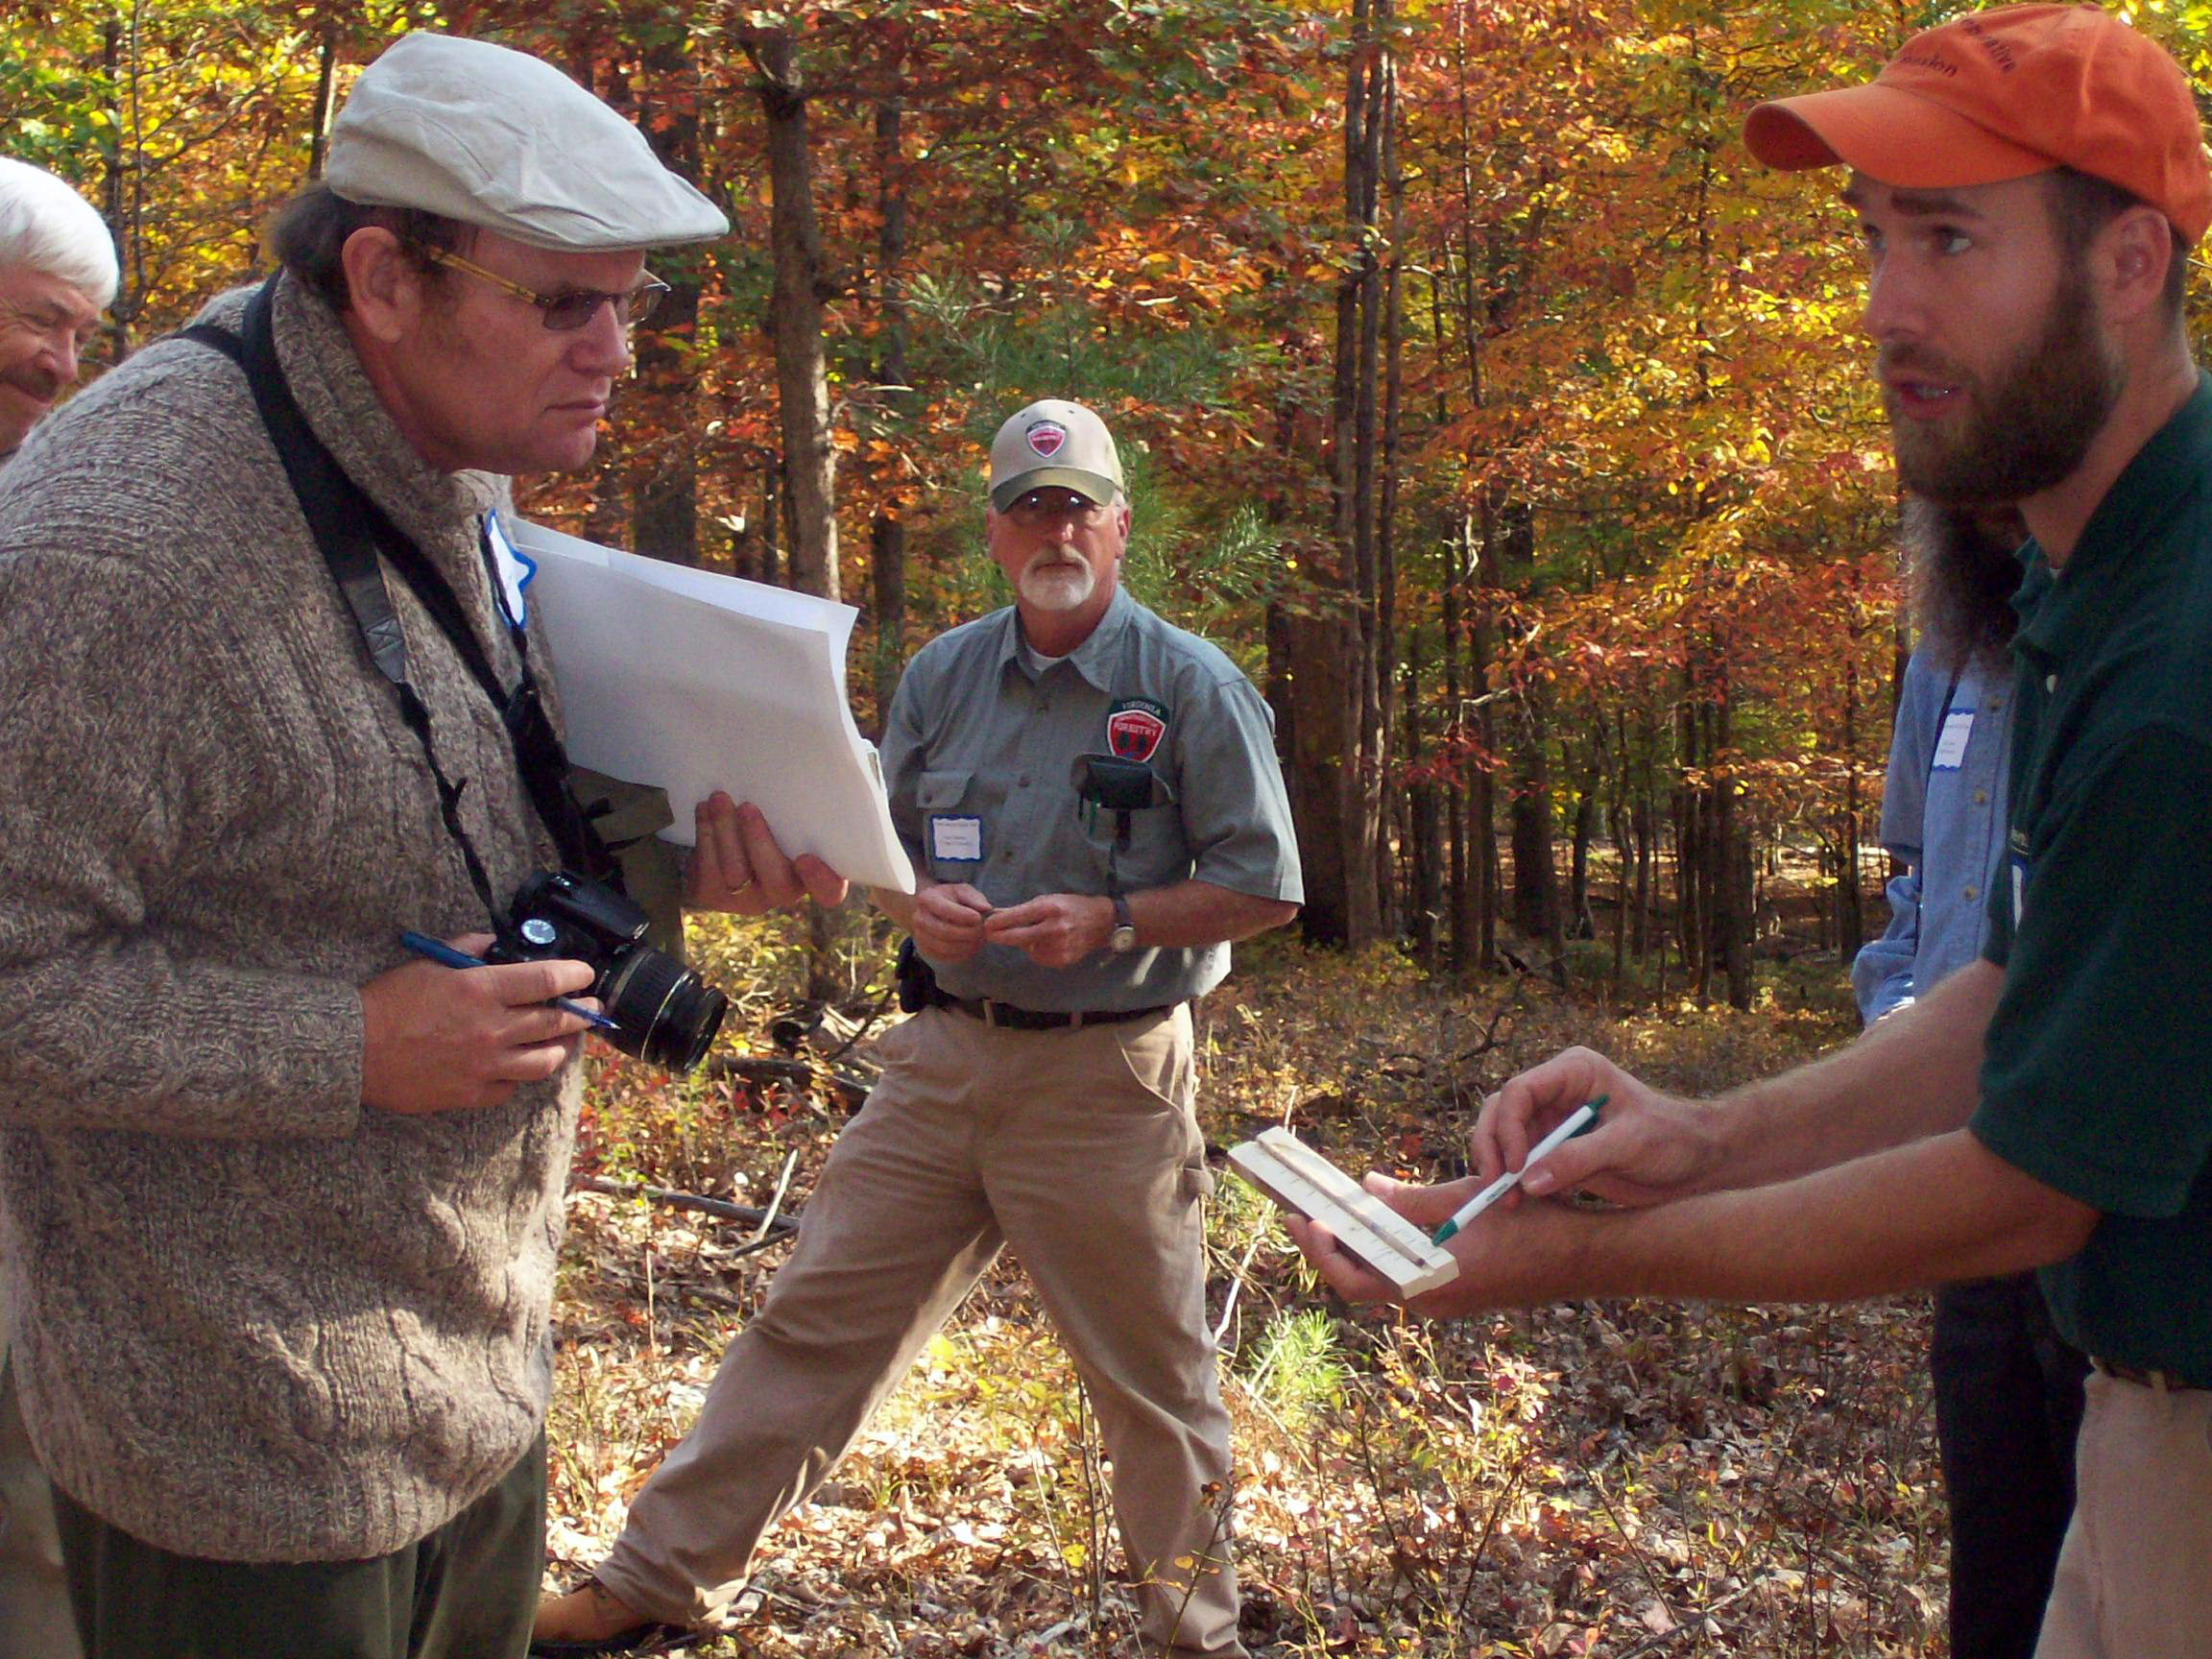 Participants in the 2008 tour in Rockbridge County learn how to determine a tree's age using growth rings.